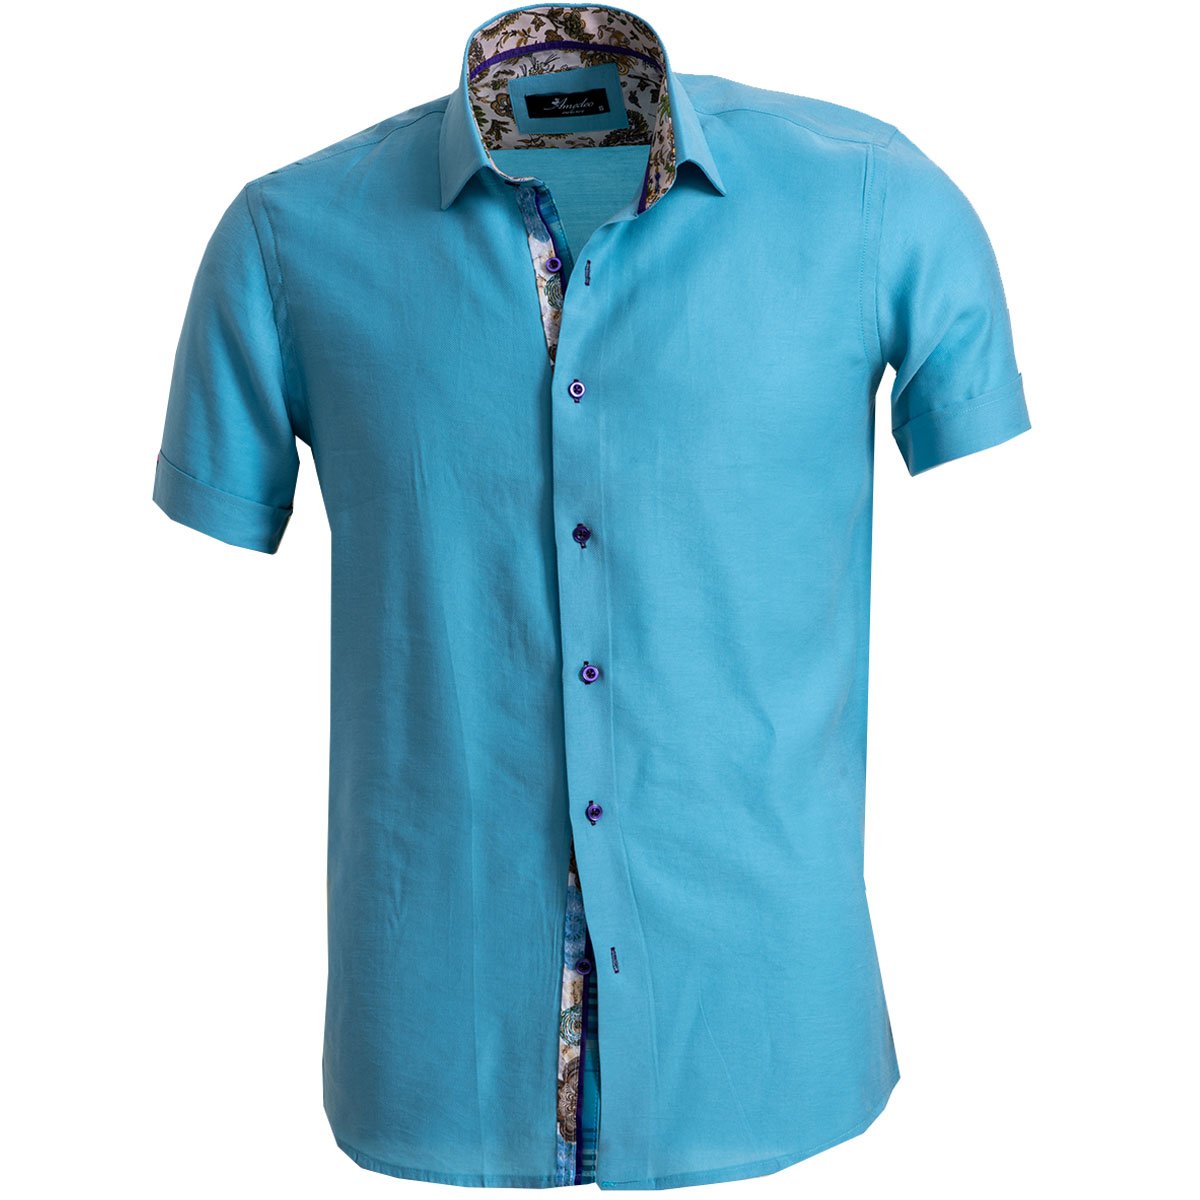 Solid Turquoise Blue Mens Short Sleeve Button Up Shirts - Tailored – Amedeo  Exclusive